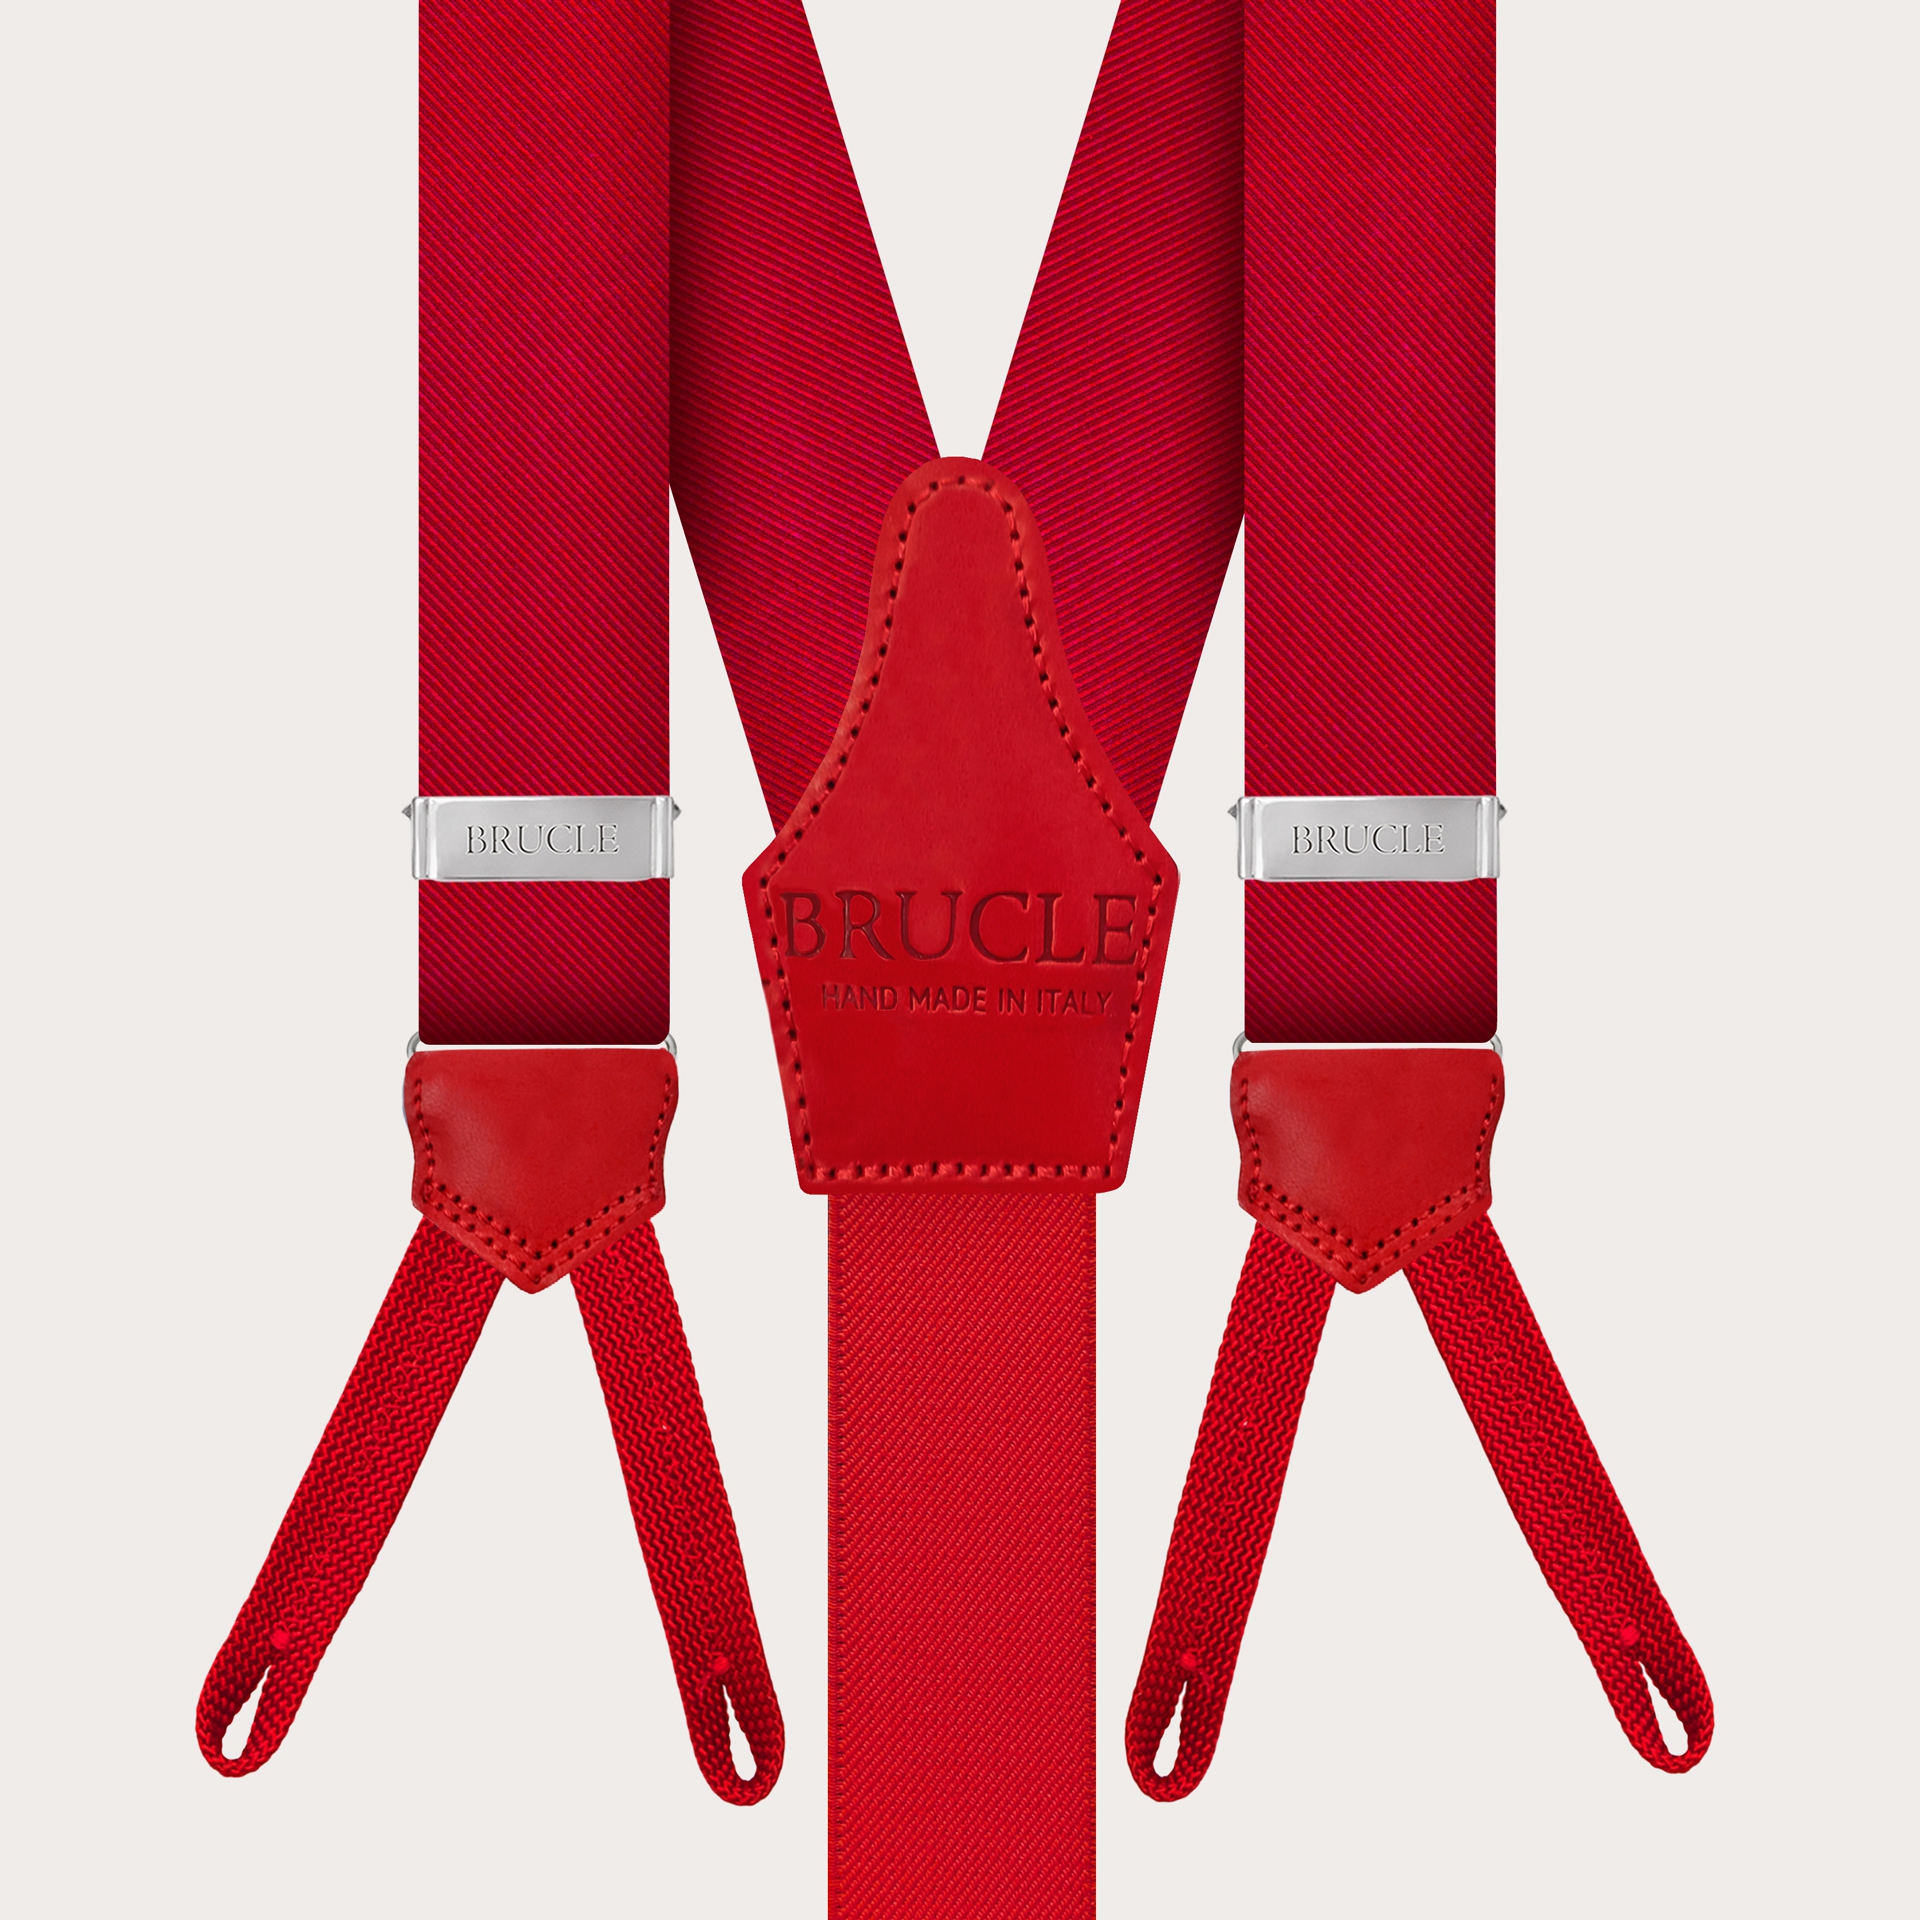 https://www.brucleshop.com/21322-large_default/vibrant-red-silk-suspenders-with-button-loops.jpg